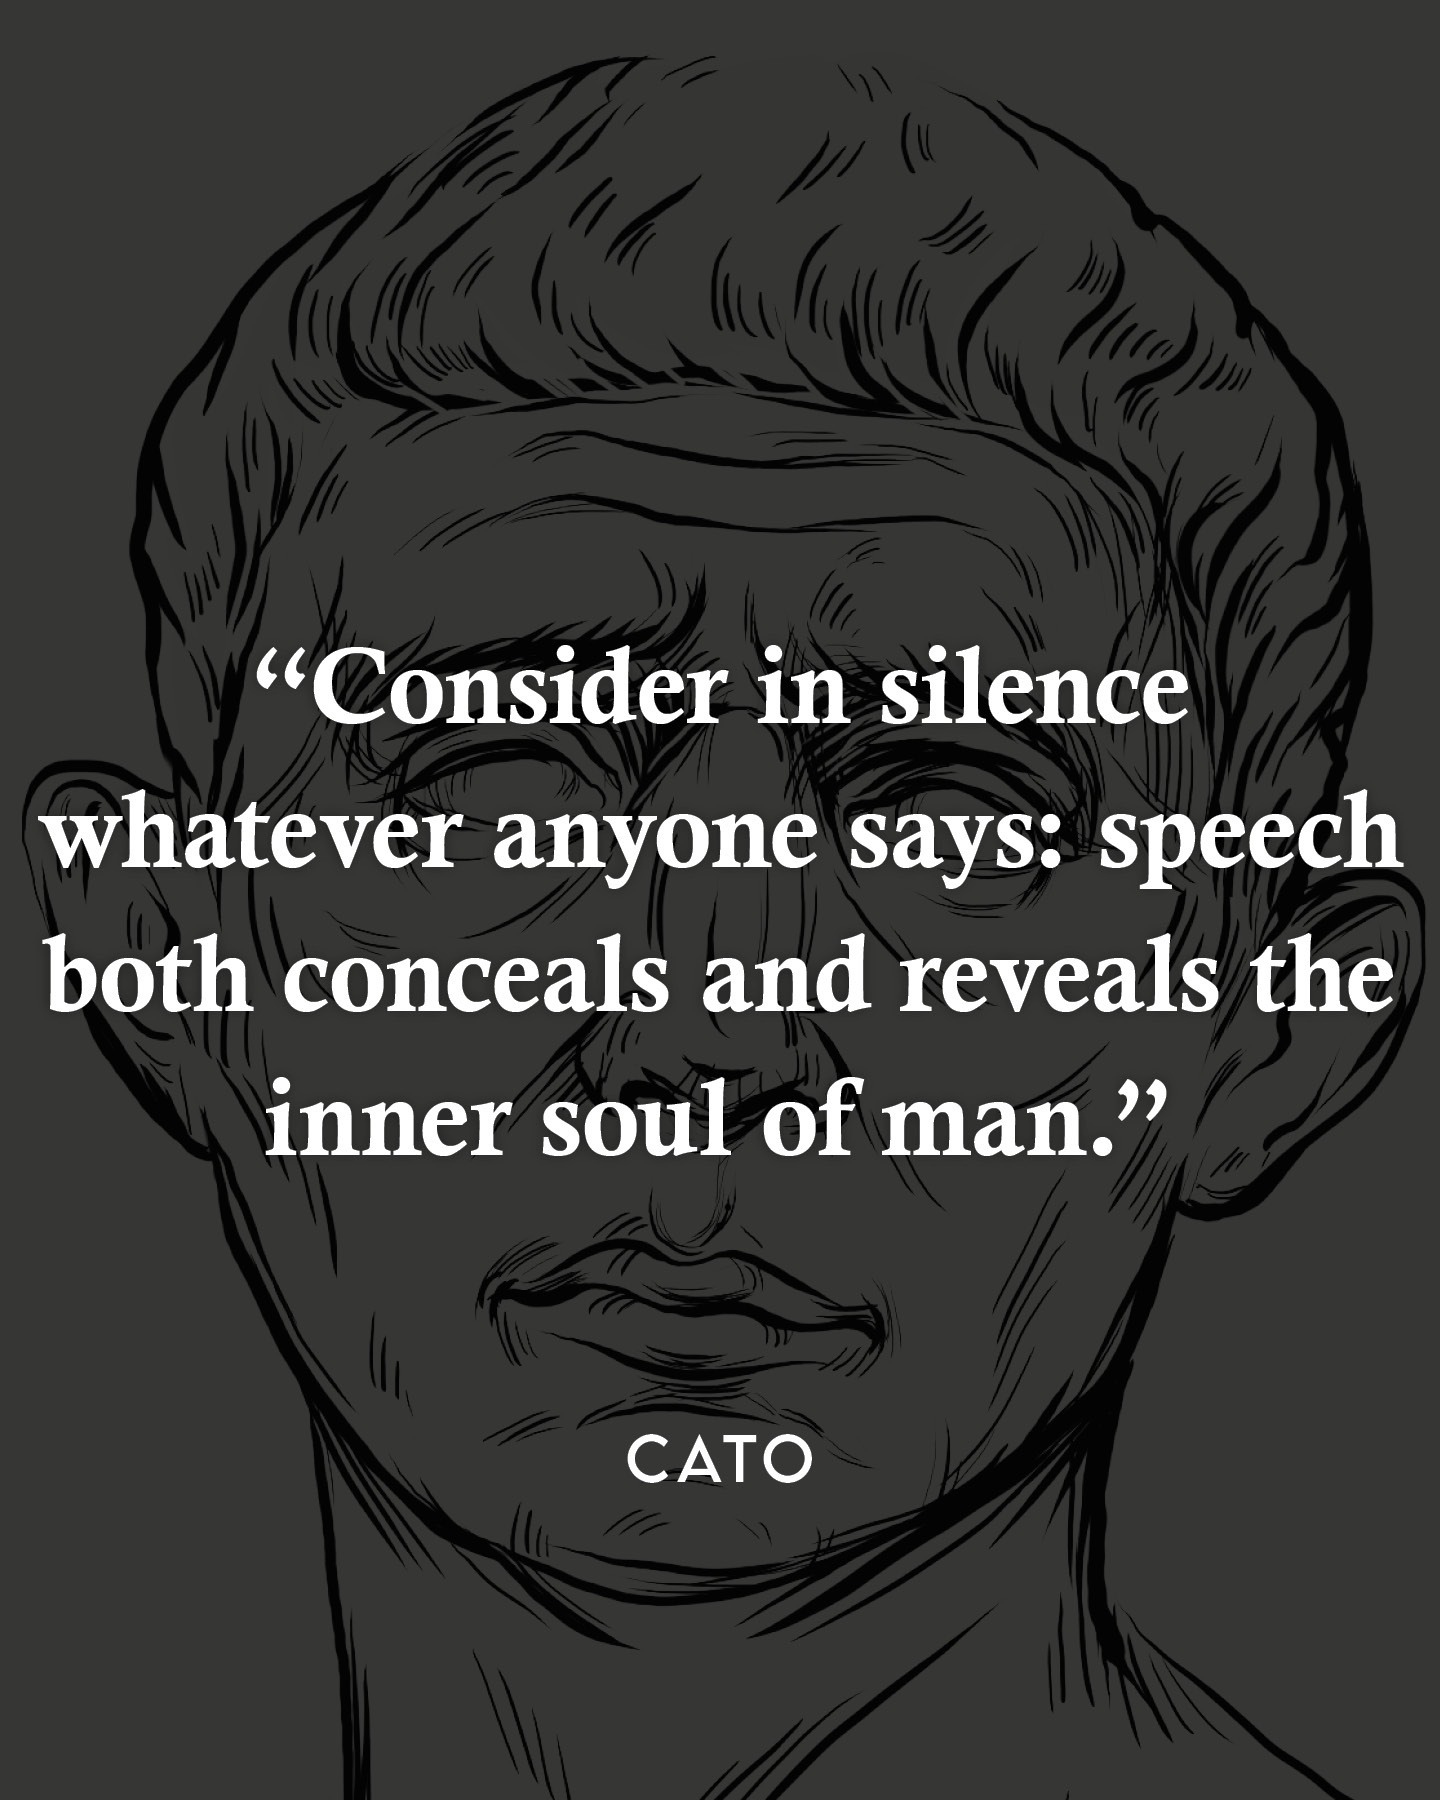 Consider in silence whatever any one says: speech both conceals and reveals the inner soul of man. Cato